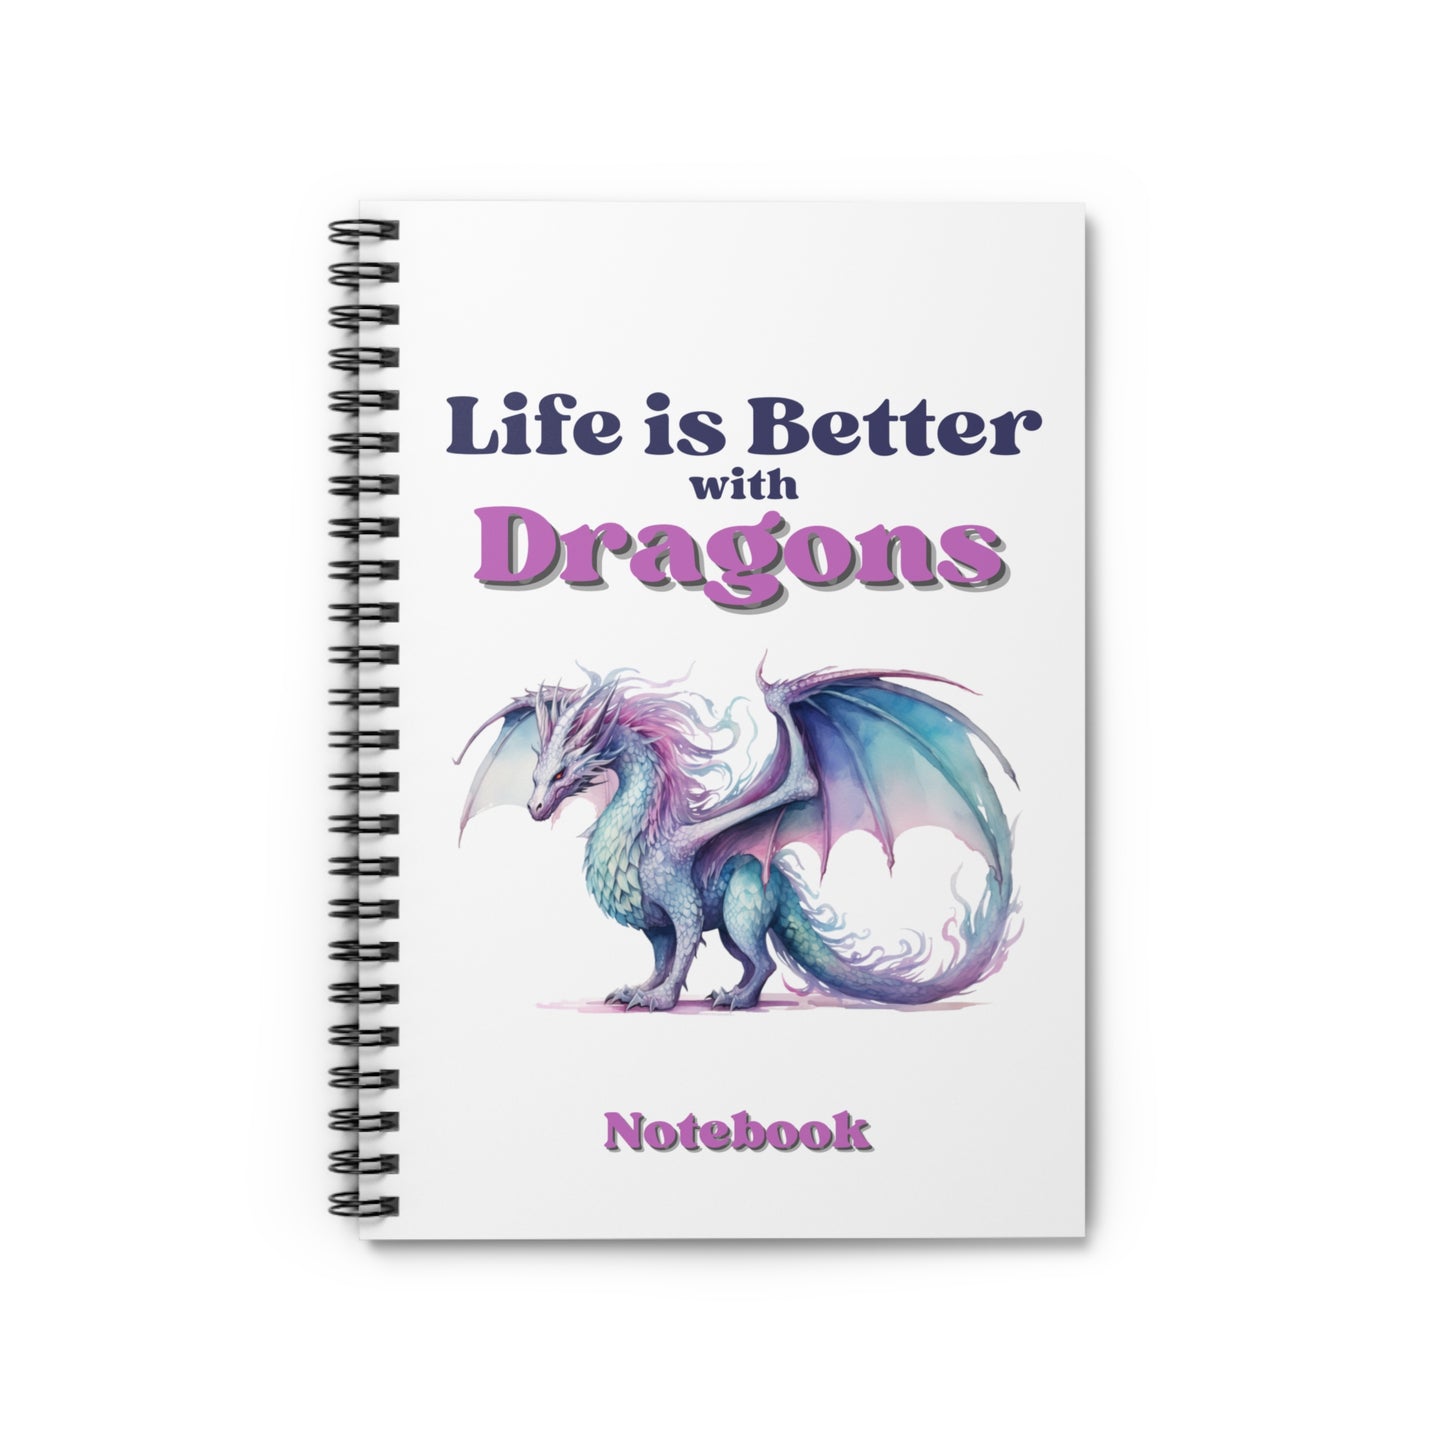 Life is Better with Dragons, Spiral Notebook - Ruled Line